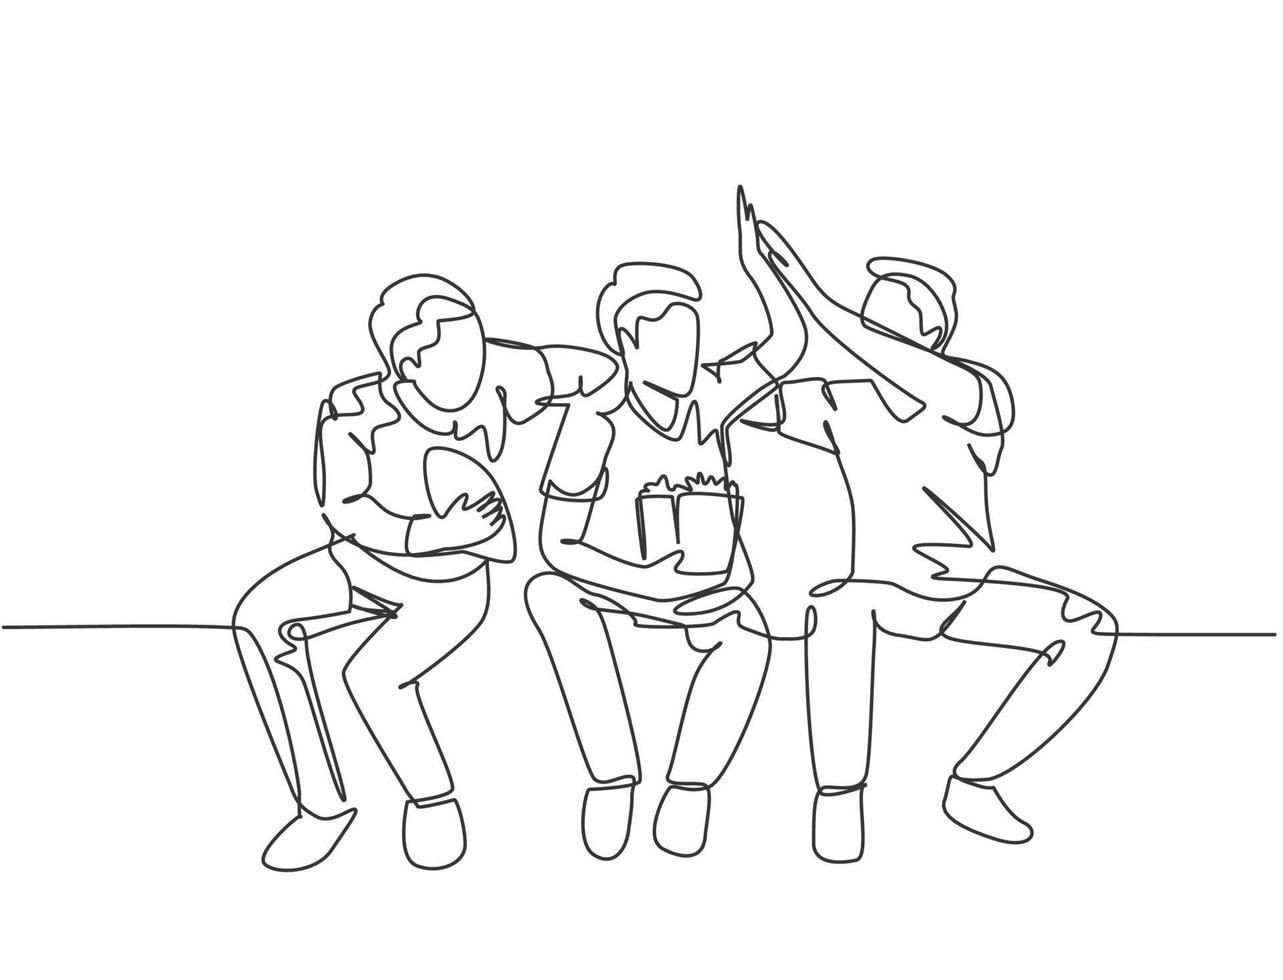 One single line drawing of young happy fans siting on sofa and watching their favorite club playing the match on the television. Fans club concept continuous line draw design vector illustration